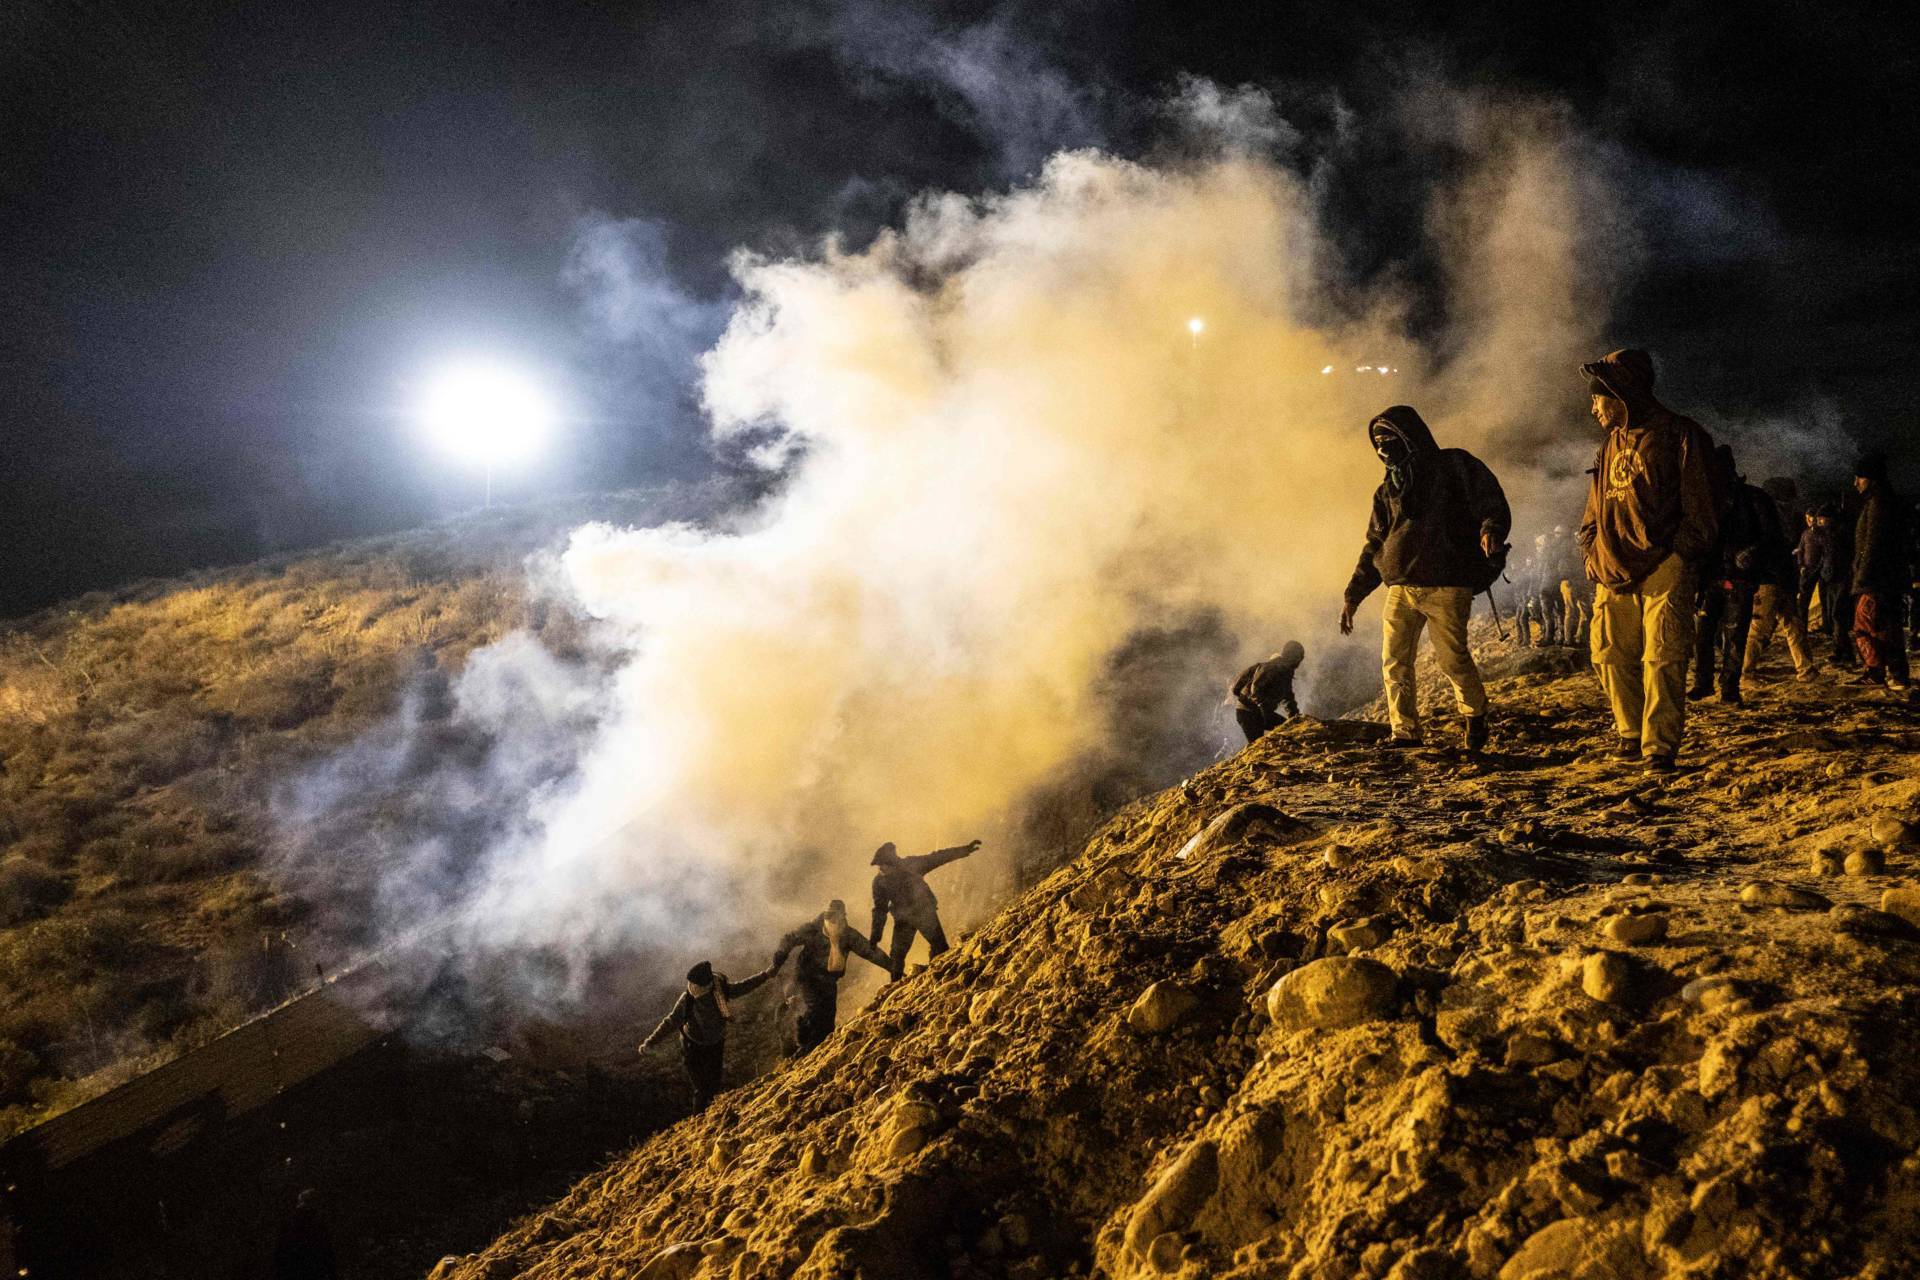 Central American migrants run away from tear gas thrown by the US border patrol, after they tried to cross from Tijuana to San Diego in the U.S., as seen from Tijuana, Mexico on January 1, 2019. Guillermo Arias/AFP/Getty Images)